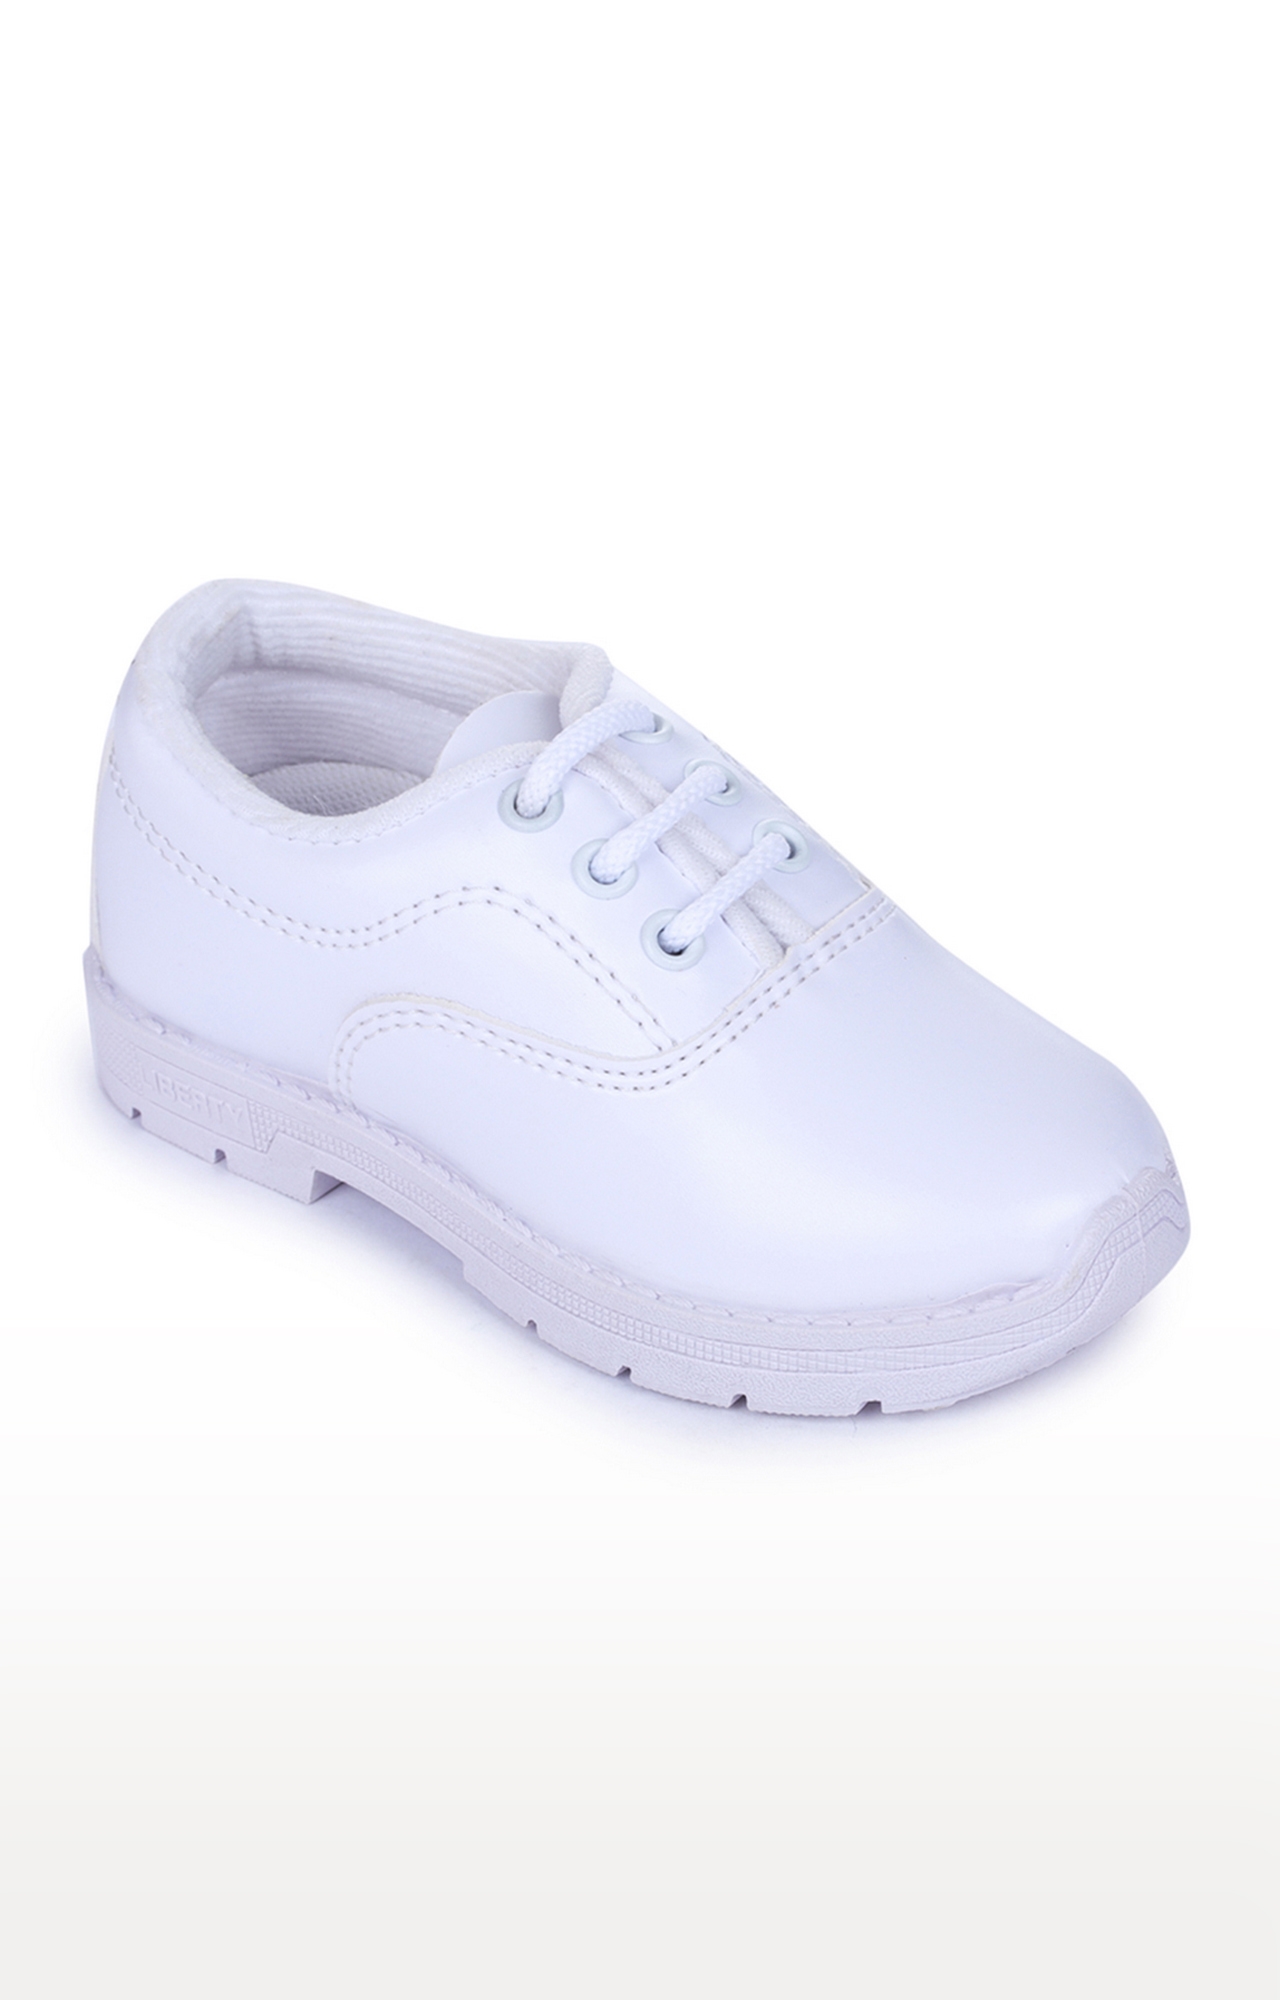 Liberty | Prefect by Liberty Unisex White Indoor Sports Shoes